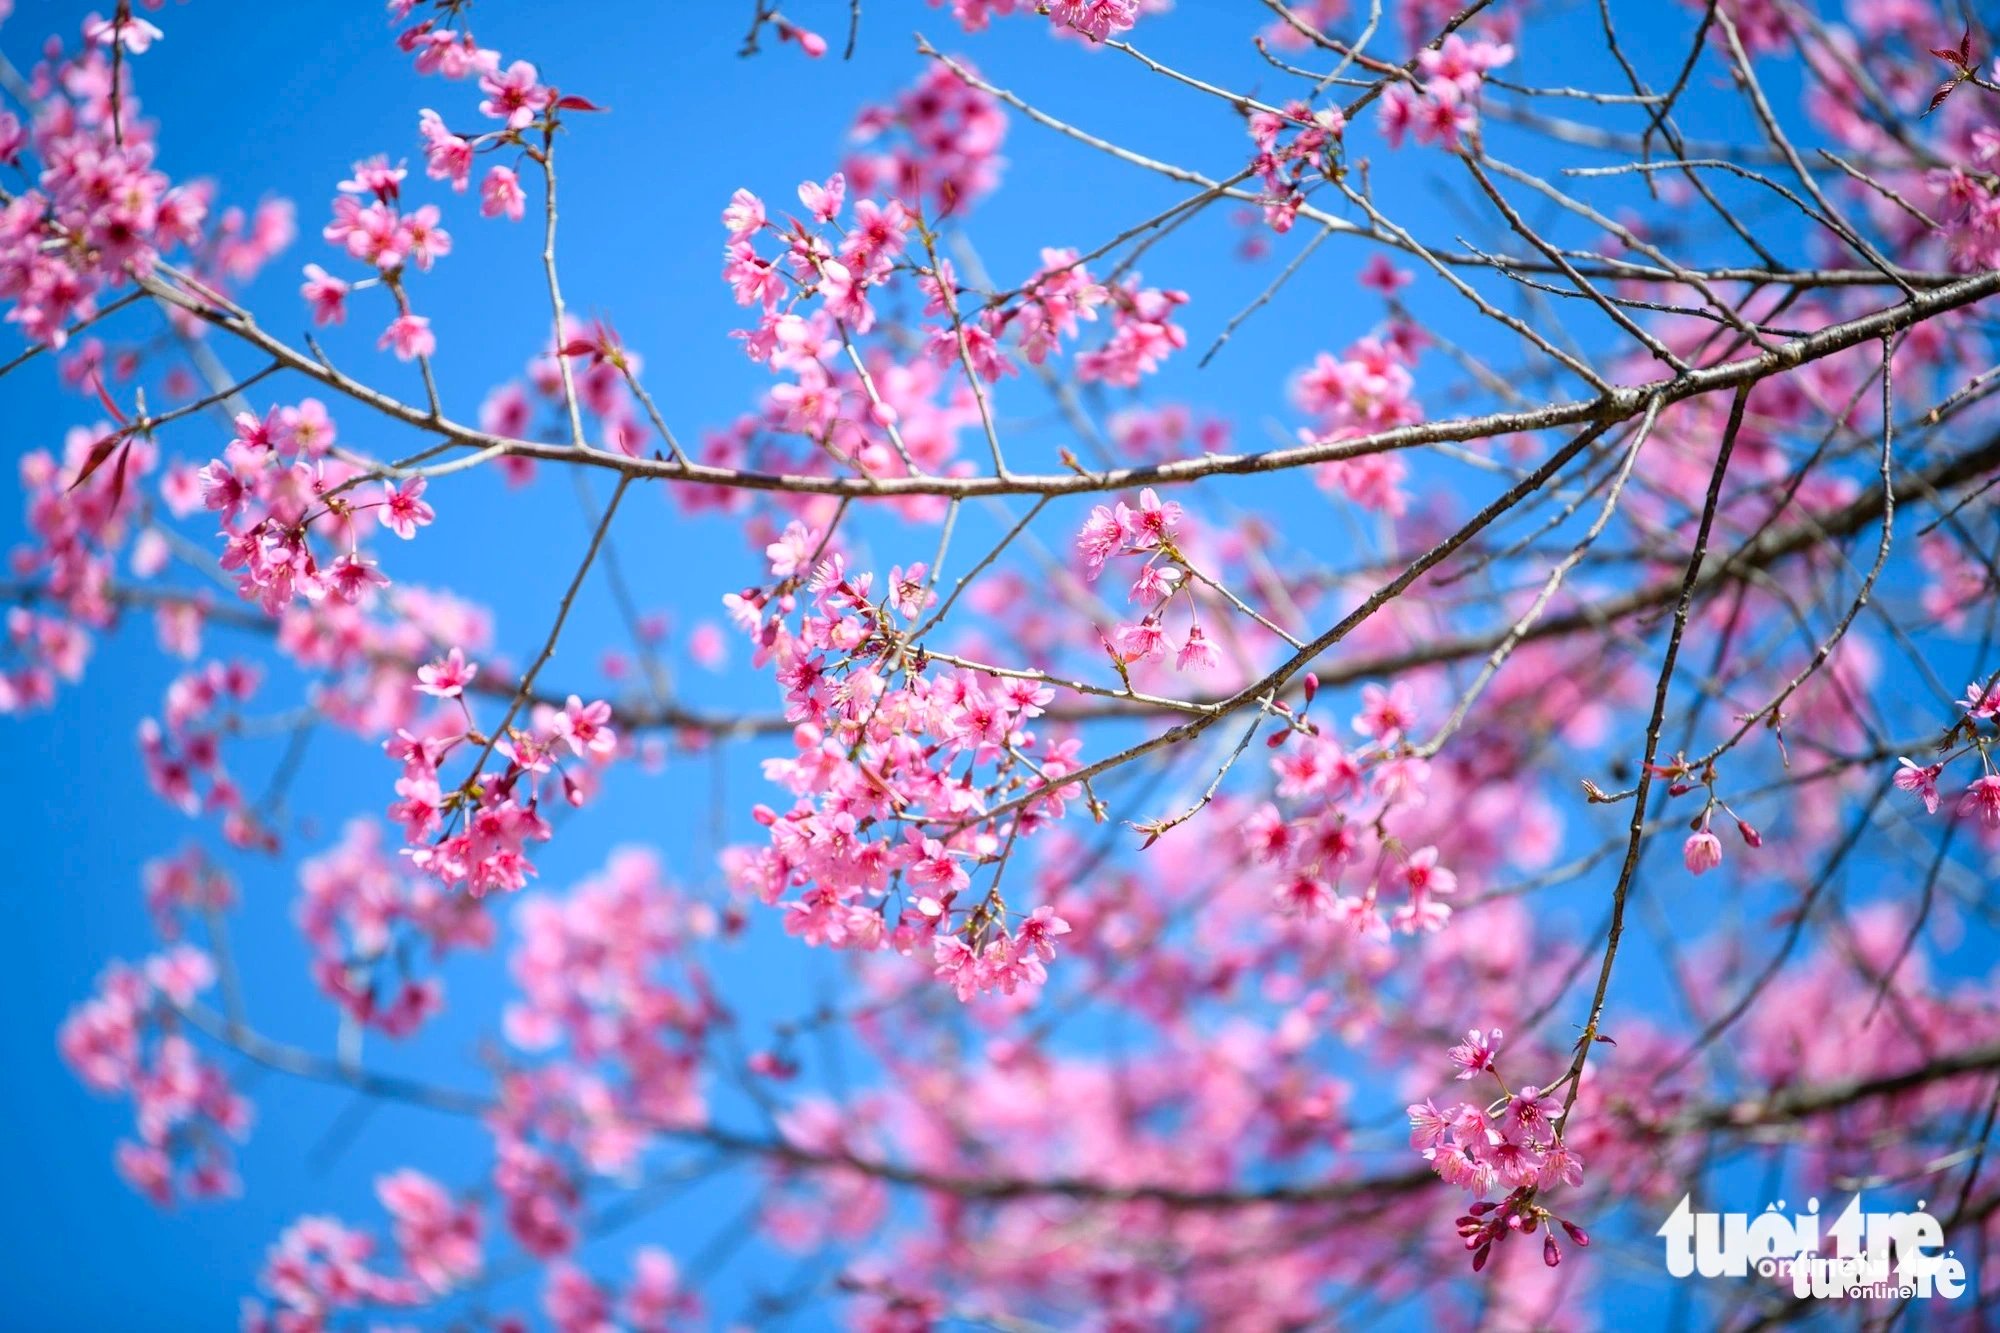 A close-up shot of wild Himalayan cherry blossoms (Prunus cerasoides), also known as sour cherry blossoms or locally as ‘hoa tớ dày,’ in La Pan Tan Commune, Mu Cang Chai District, Yen Bai Province, Vietnam. Photo: Nam Tran / Tuoi Tre